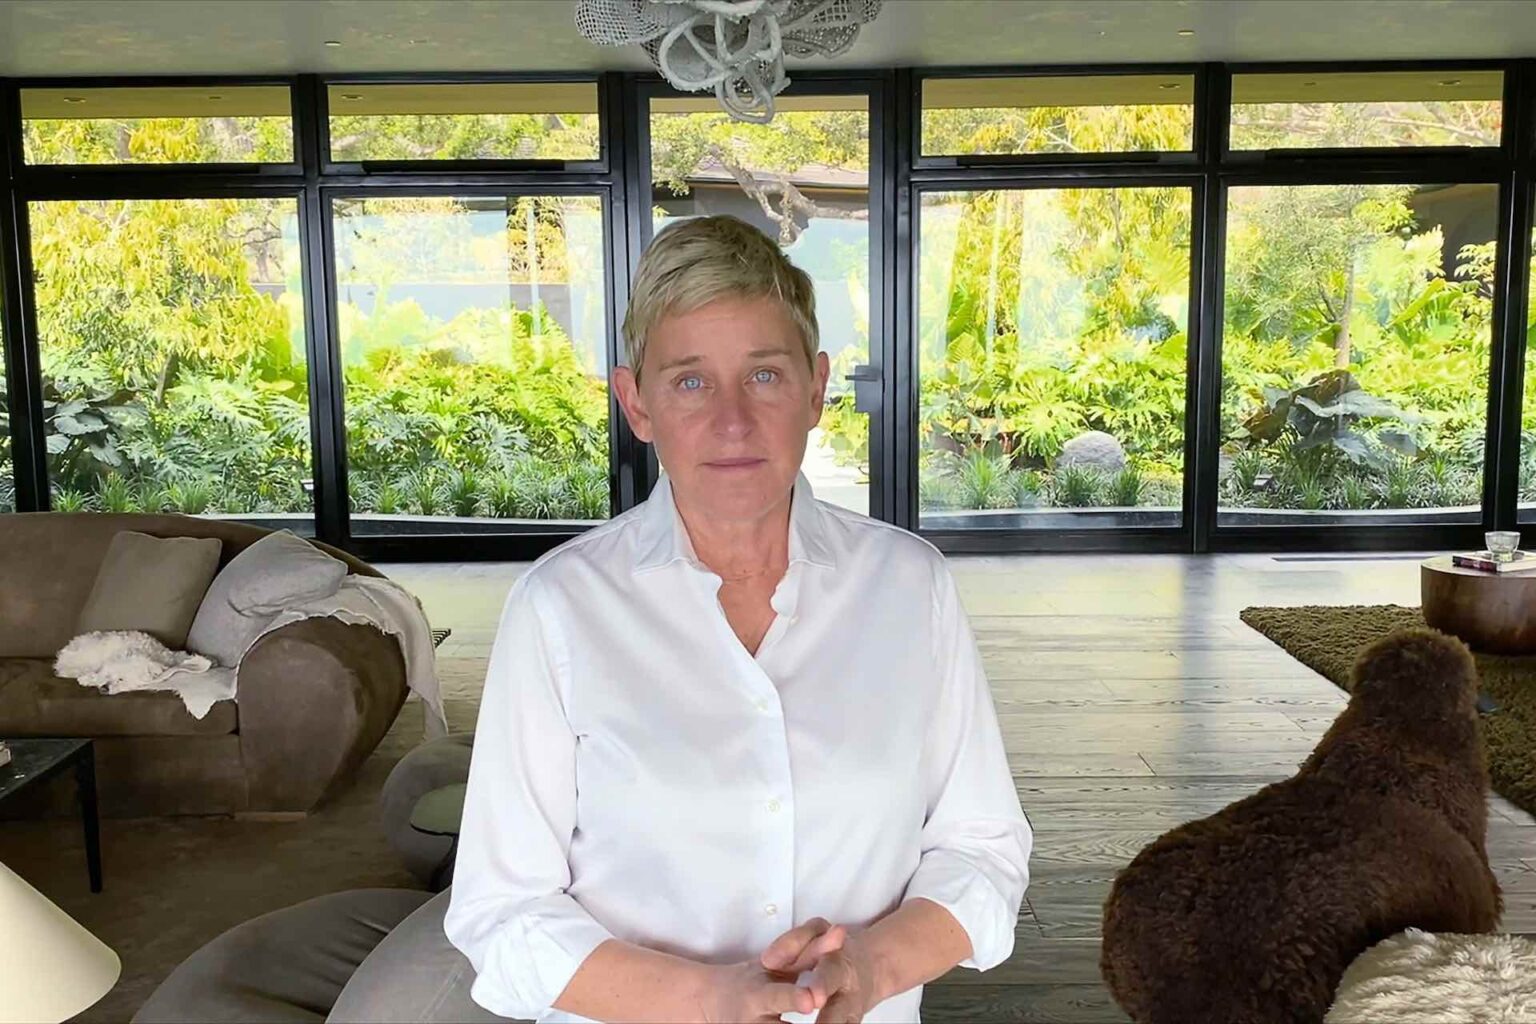 Talk show host Ellen DeGeneres has been working from home to film episodes of her show. Here's what you need to know.